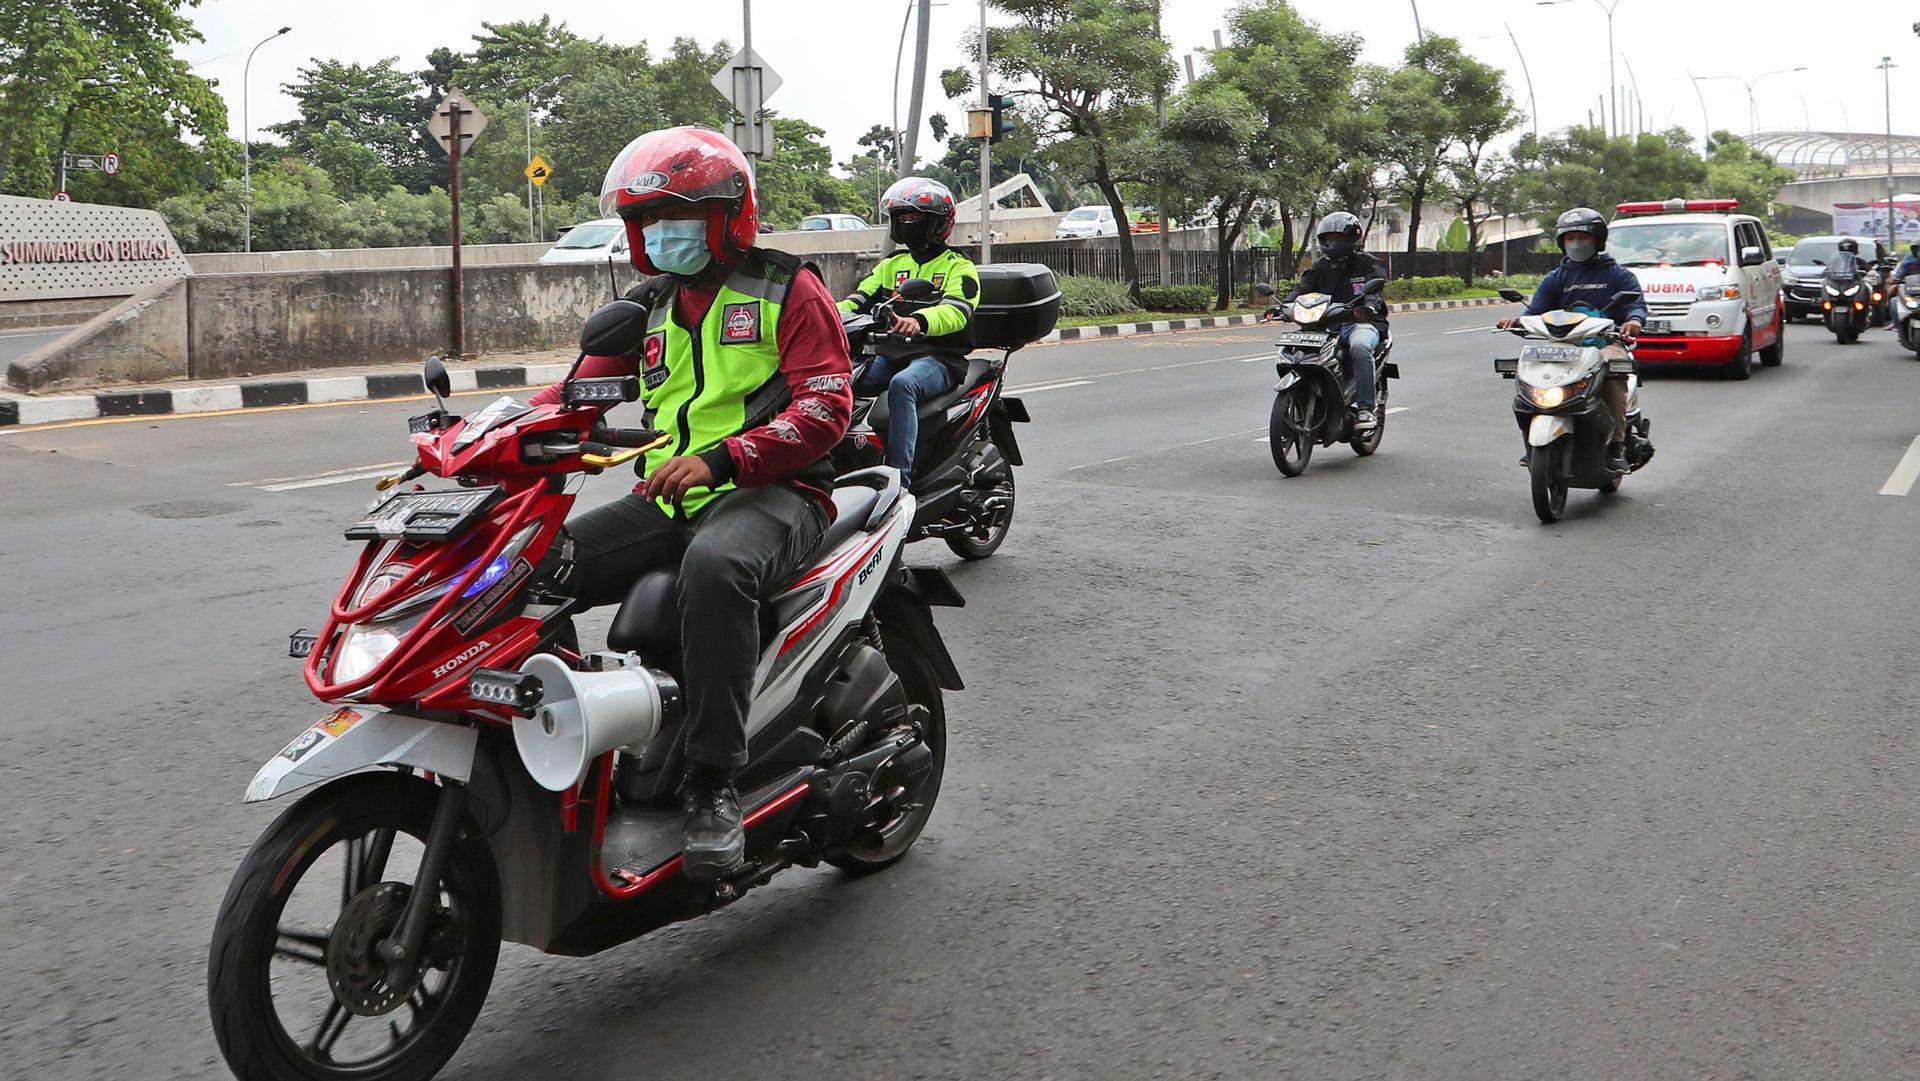 Several people on motorbikes and wearing helmets are shown riding in front of an ambulance. 